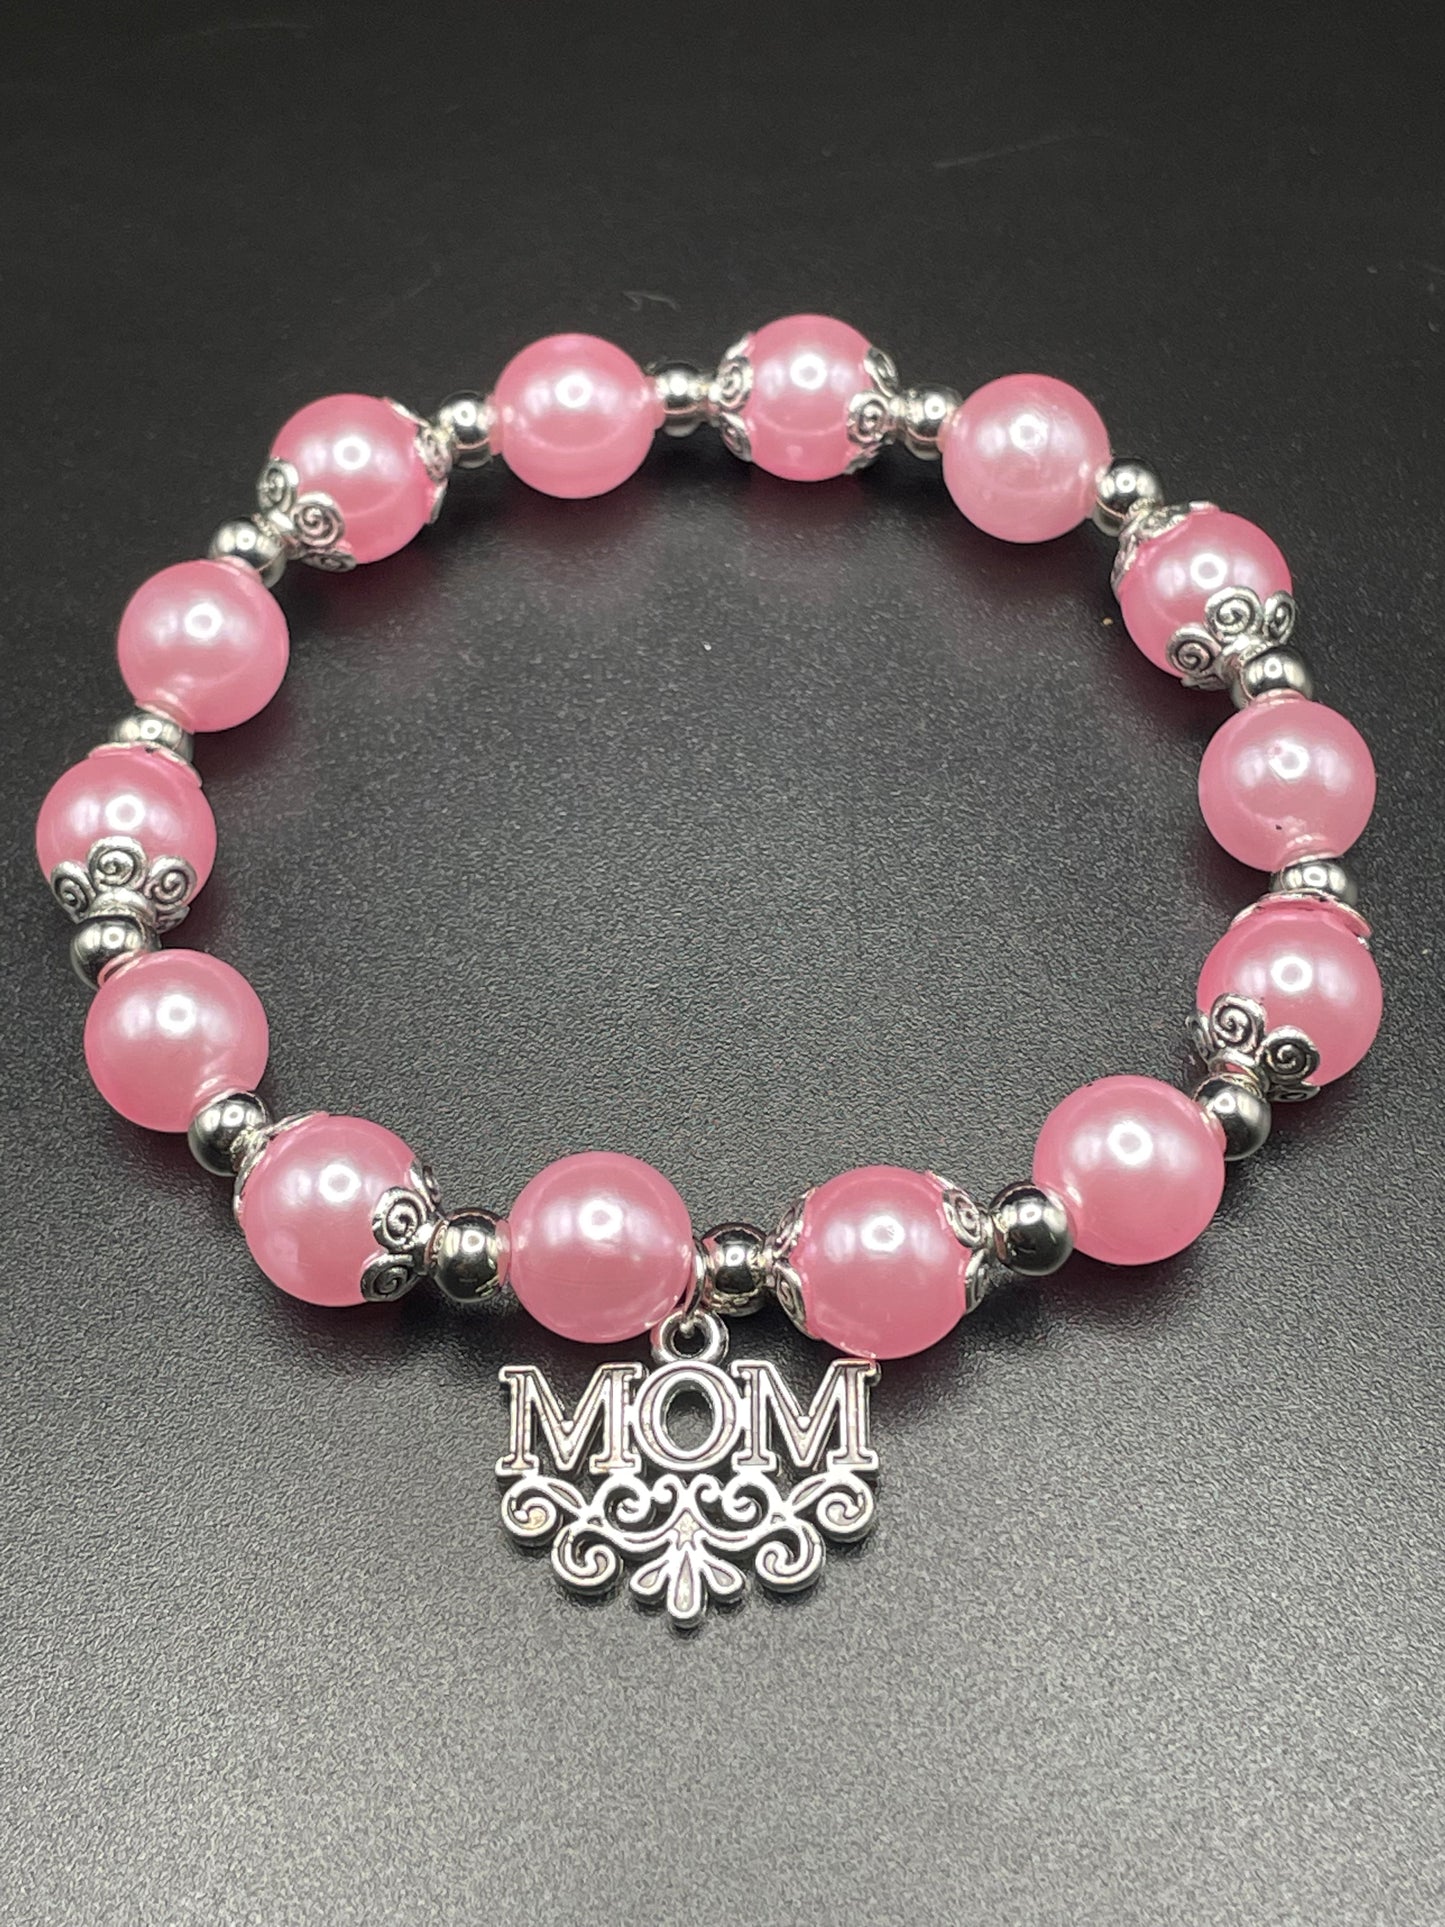 Mother’s Day “Mom” Pink Pearl Charm Bracelet